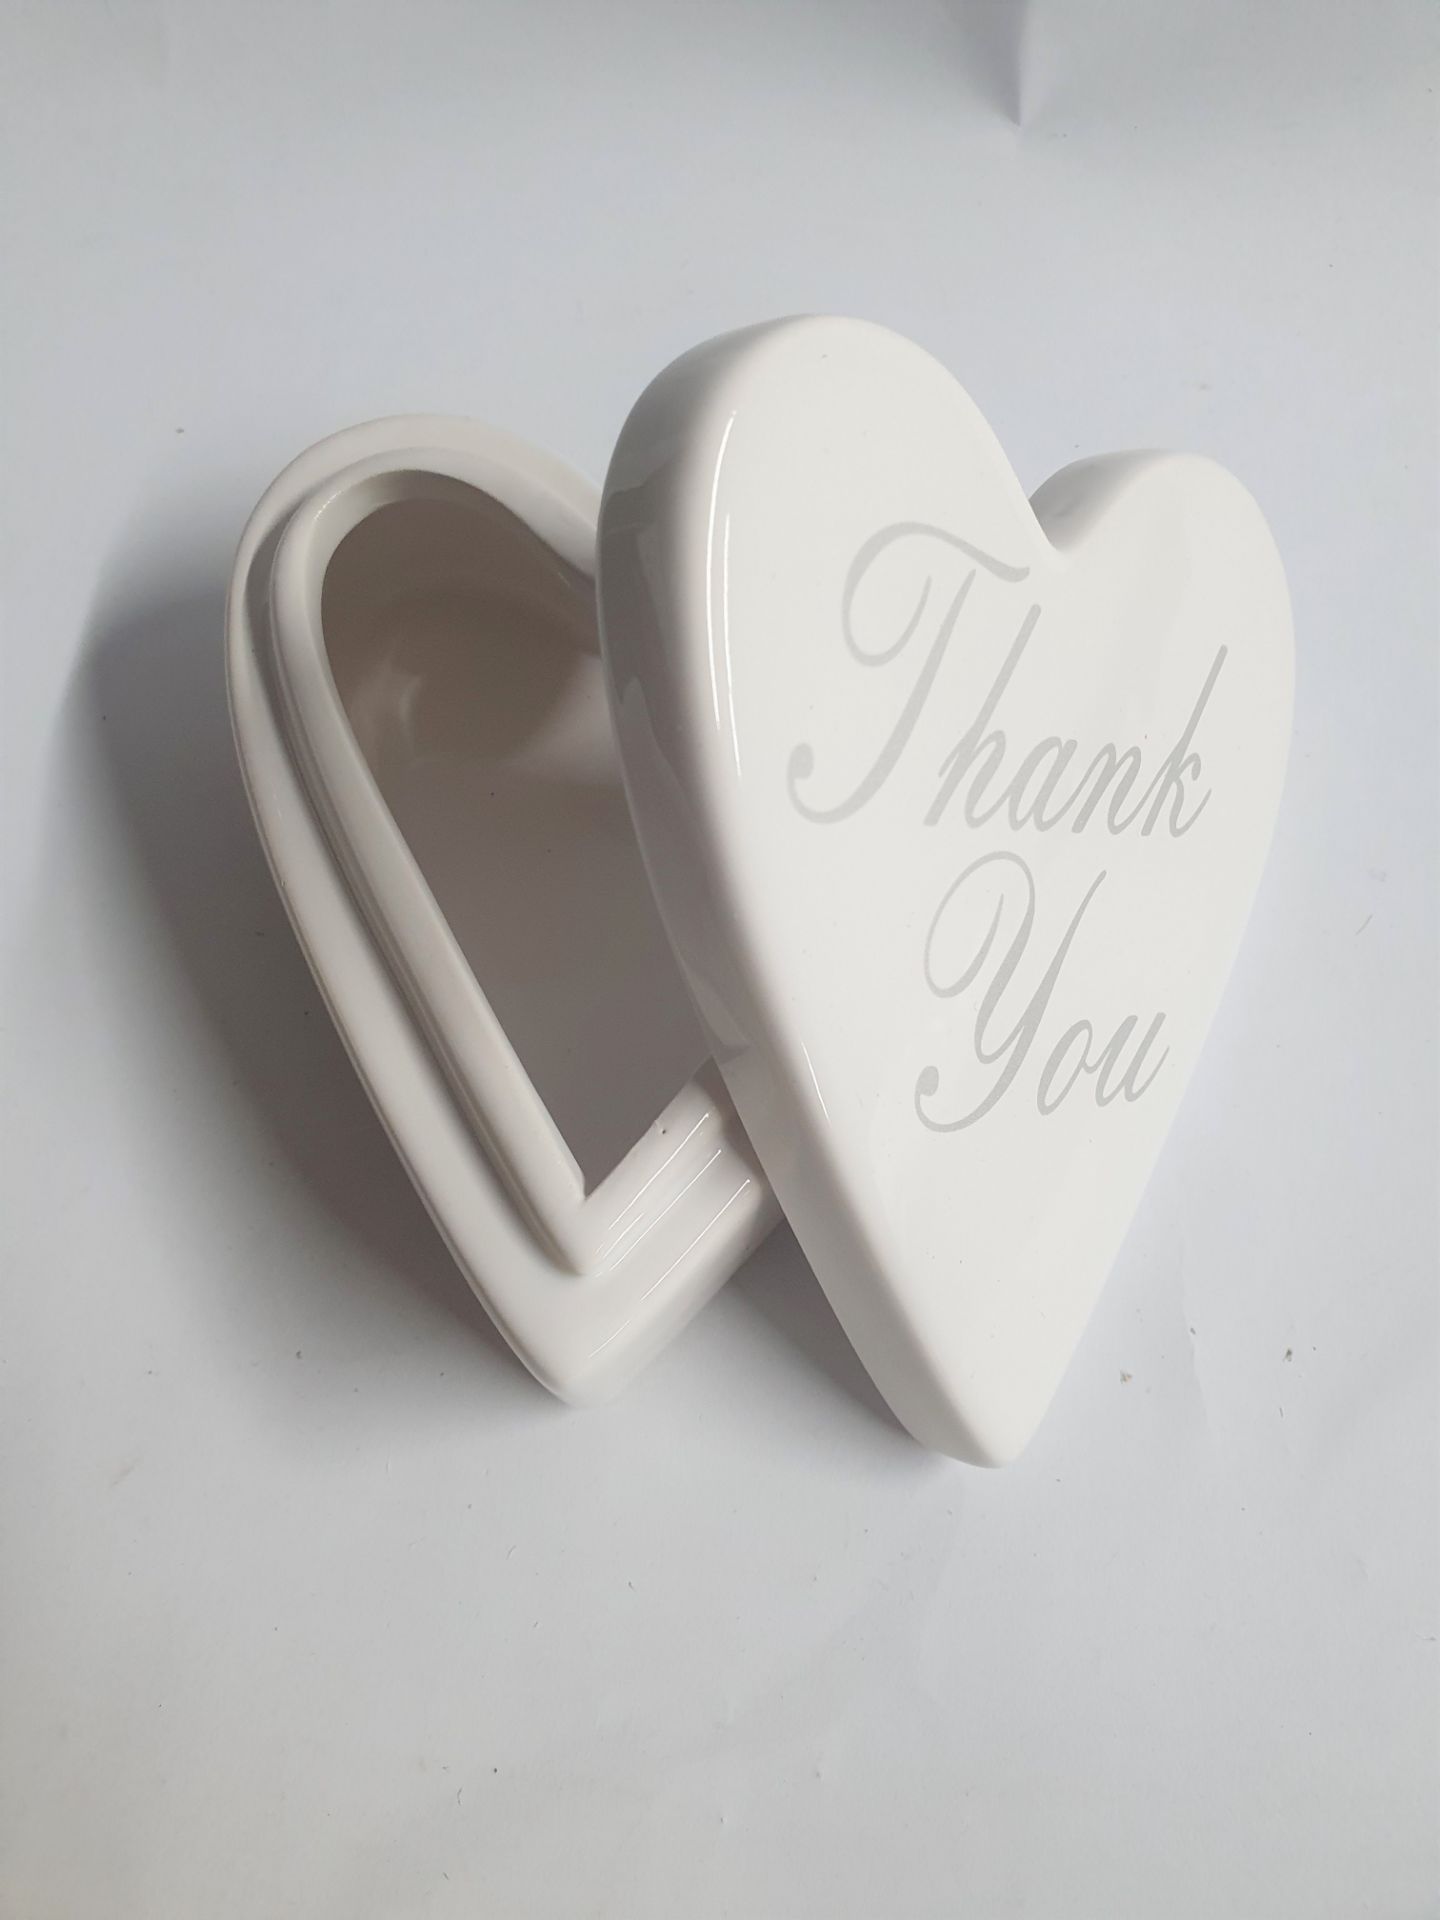 4 x Sets of Ceramic Trinket Boxes | Heart Shaped - Image 4 of 5